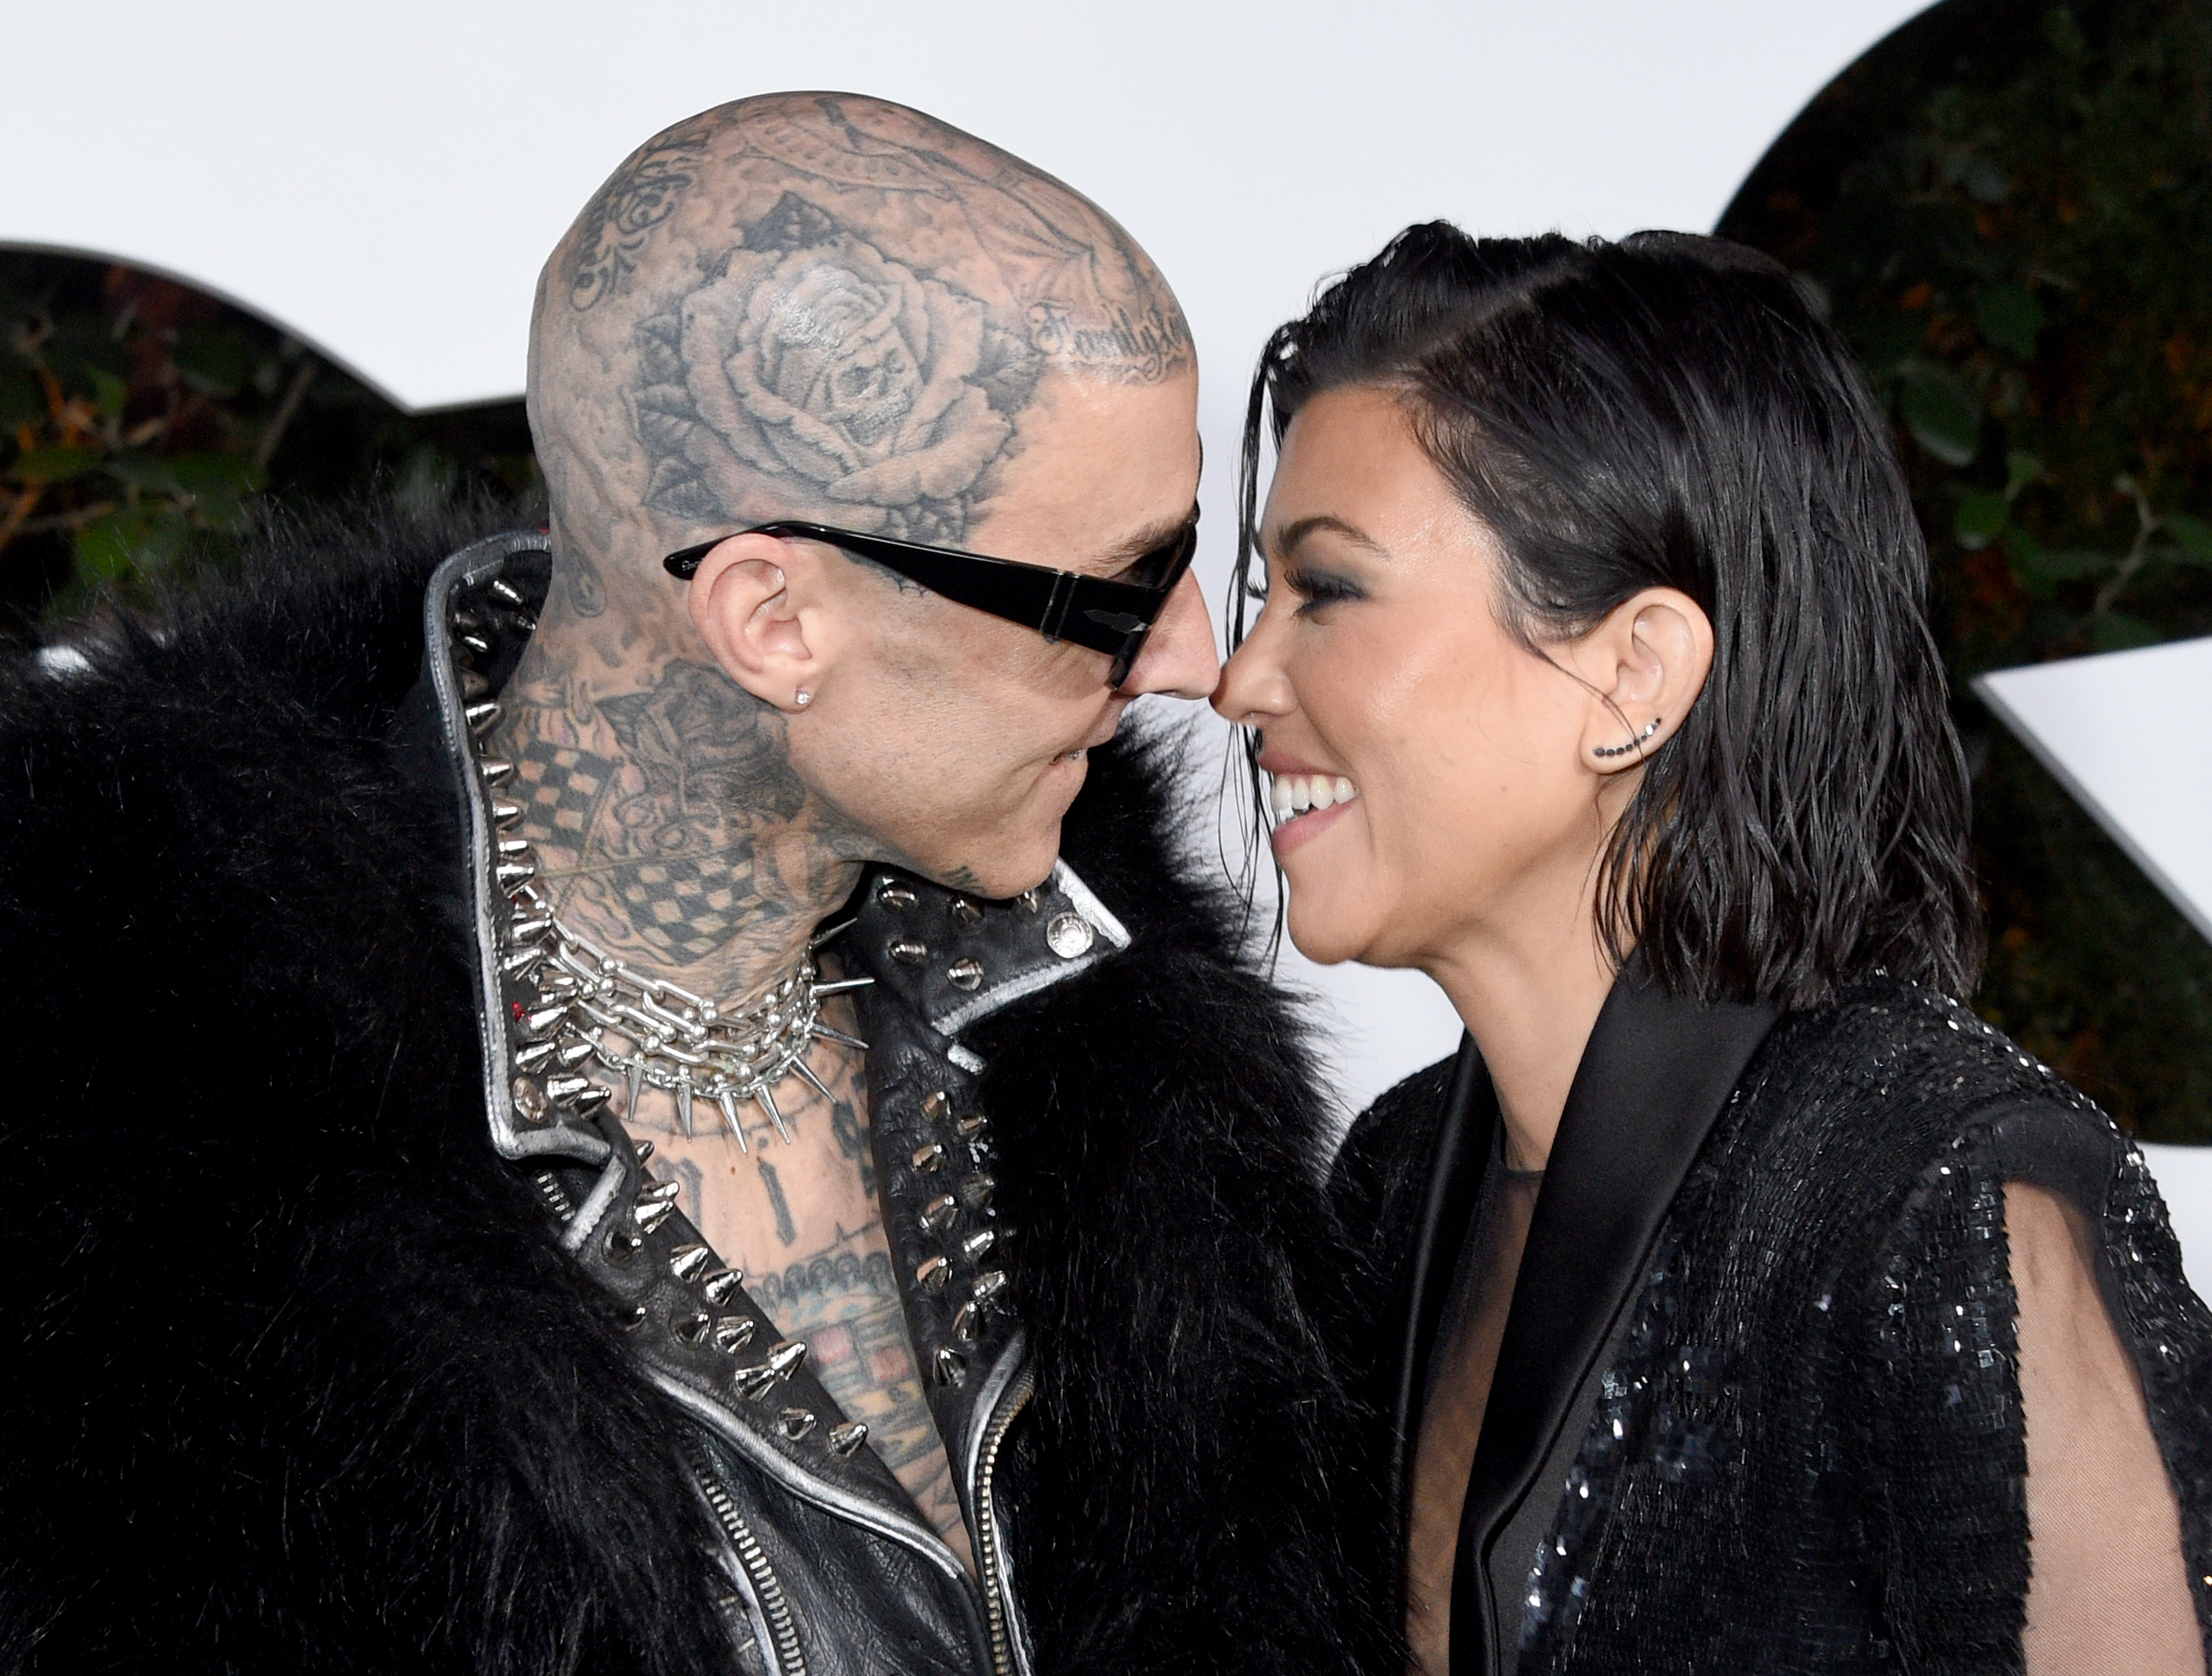 Two people smiling close to each other, one with tattoos and sunglasses, the other in a glittery dress